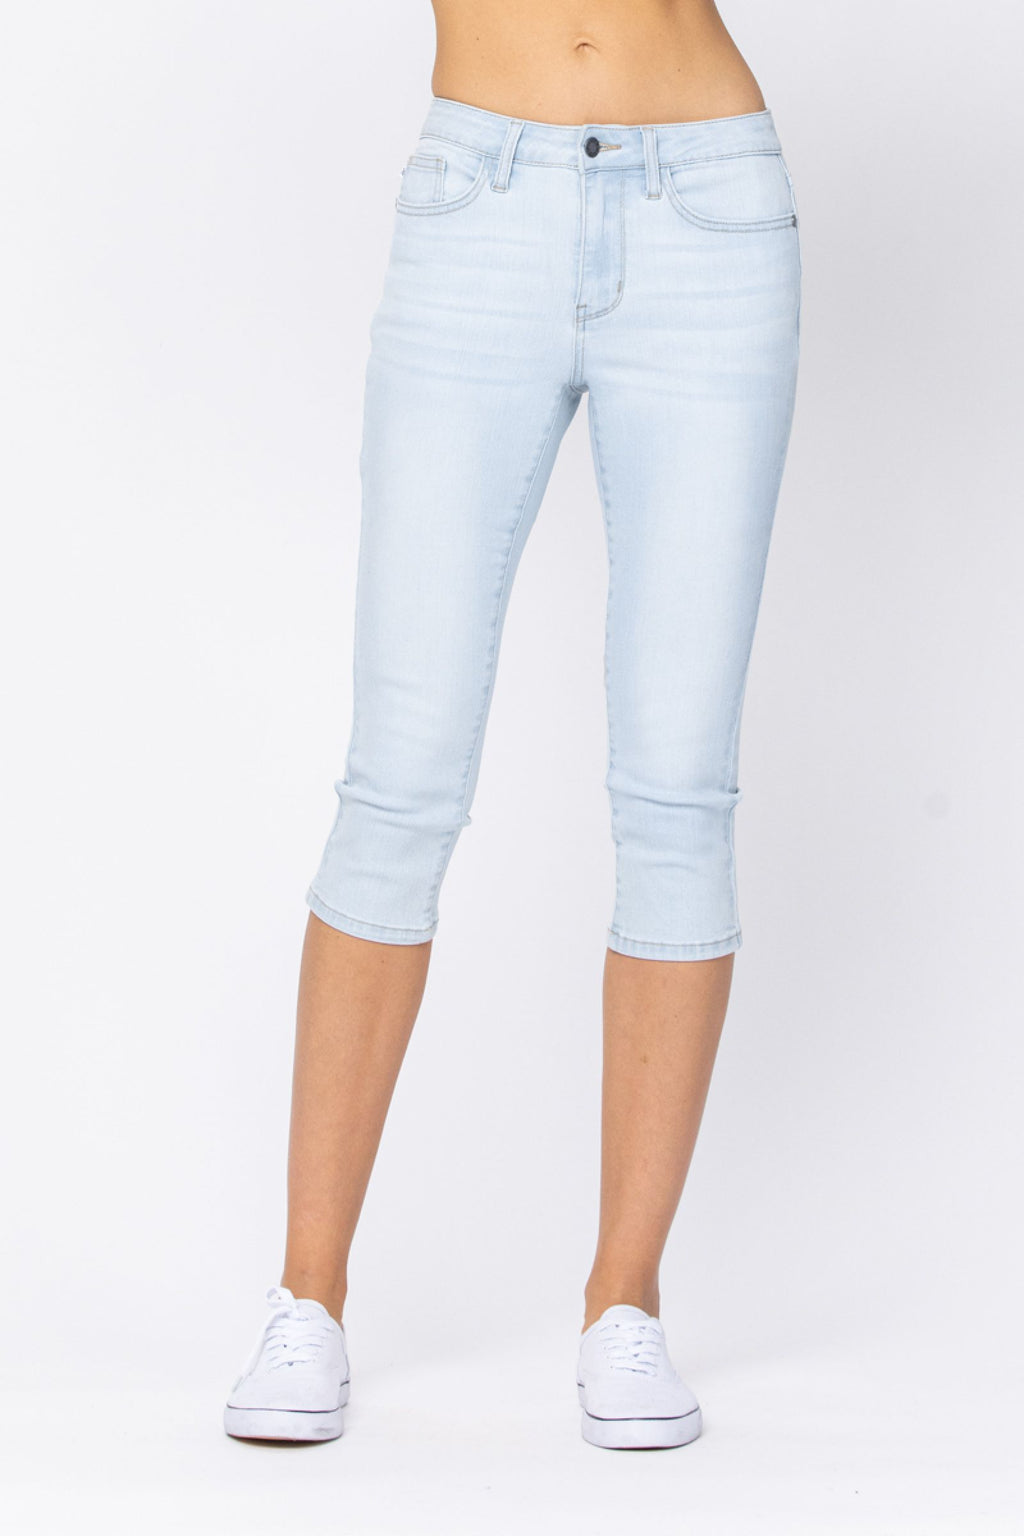 Krazzy X Capri For Girls Casual Dyed/Washed Denim Price in India - Buy  Krazzy X Capri For Girls Casual Dyed/Washed Denim online at